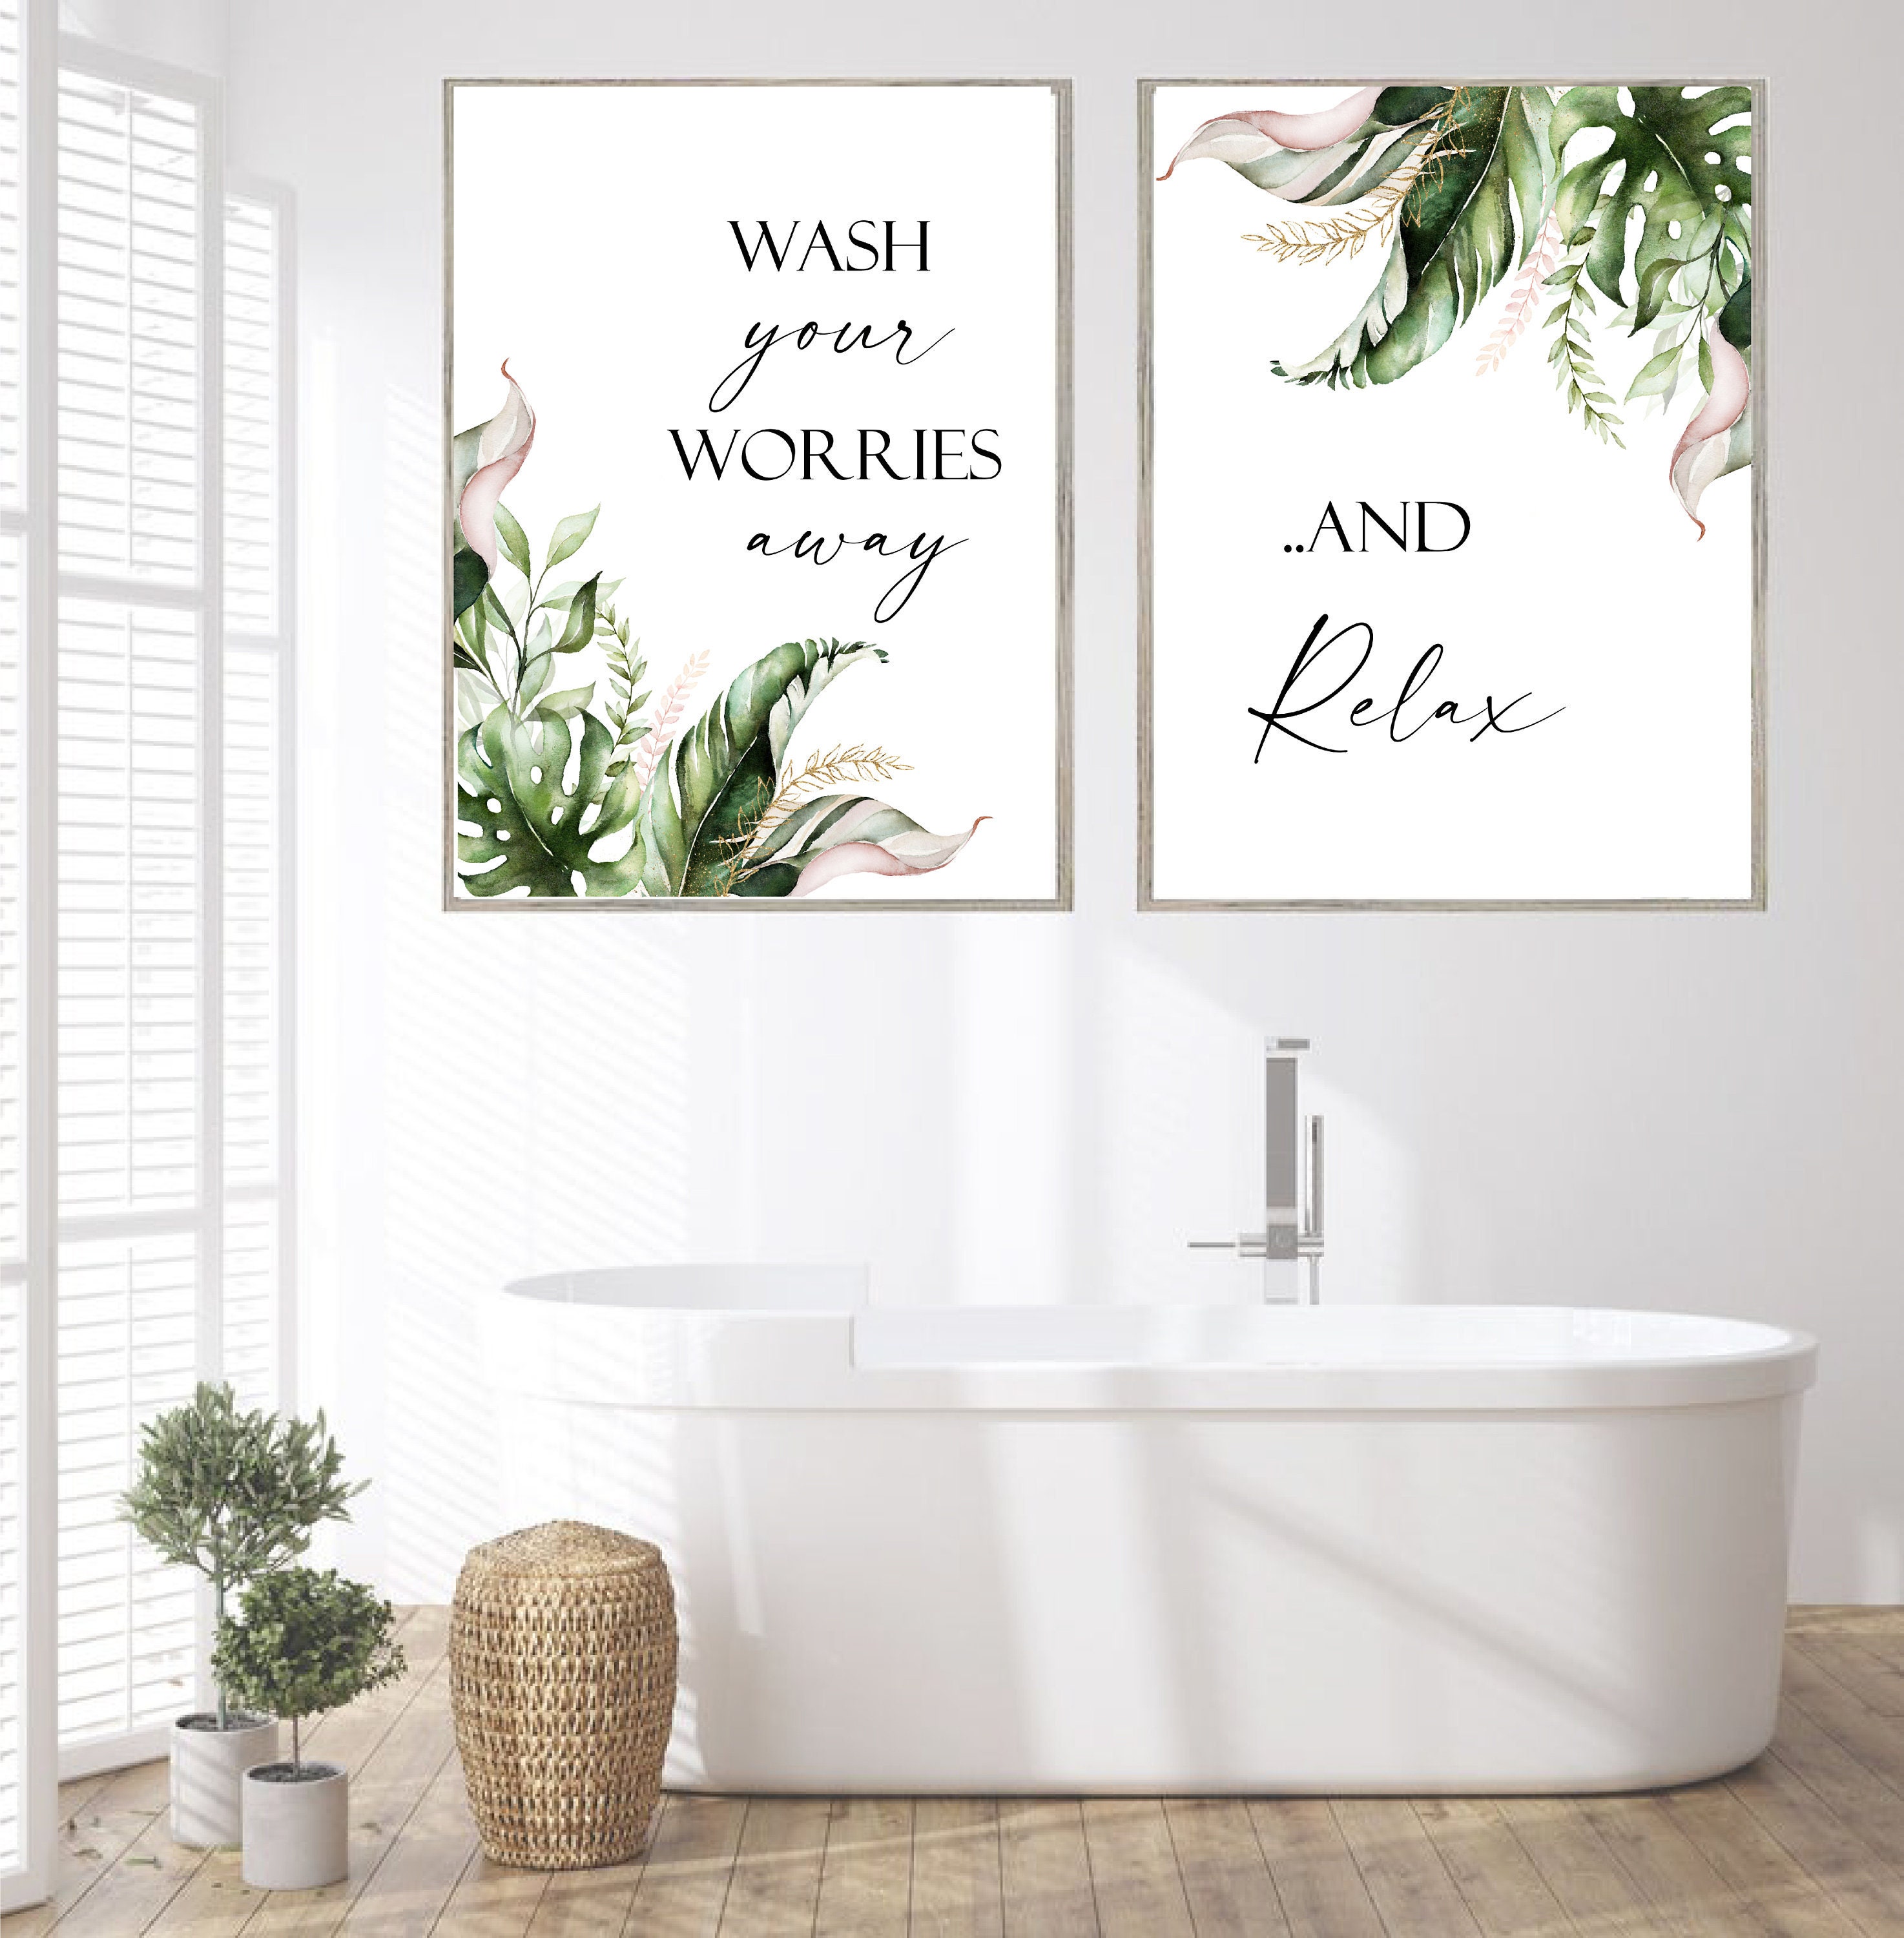 otte Mindre personificering Bathroom Wall Artwash Your Worries Away and Relaxbathroom - Etsy